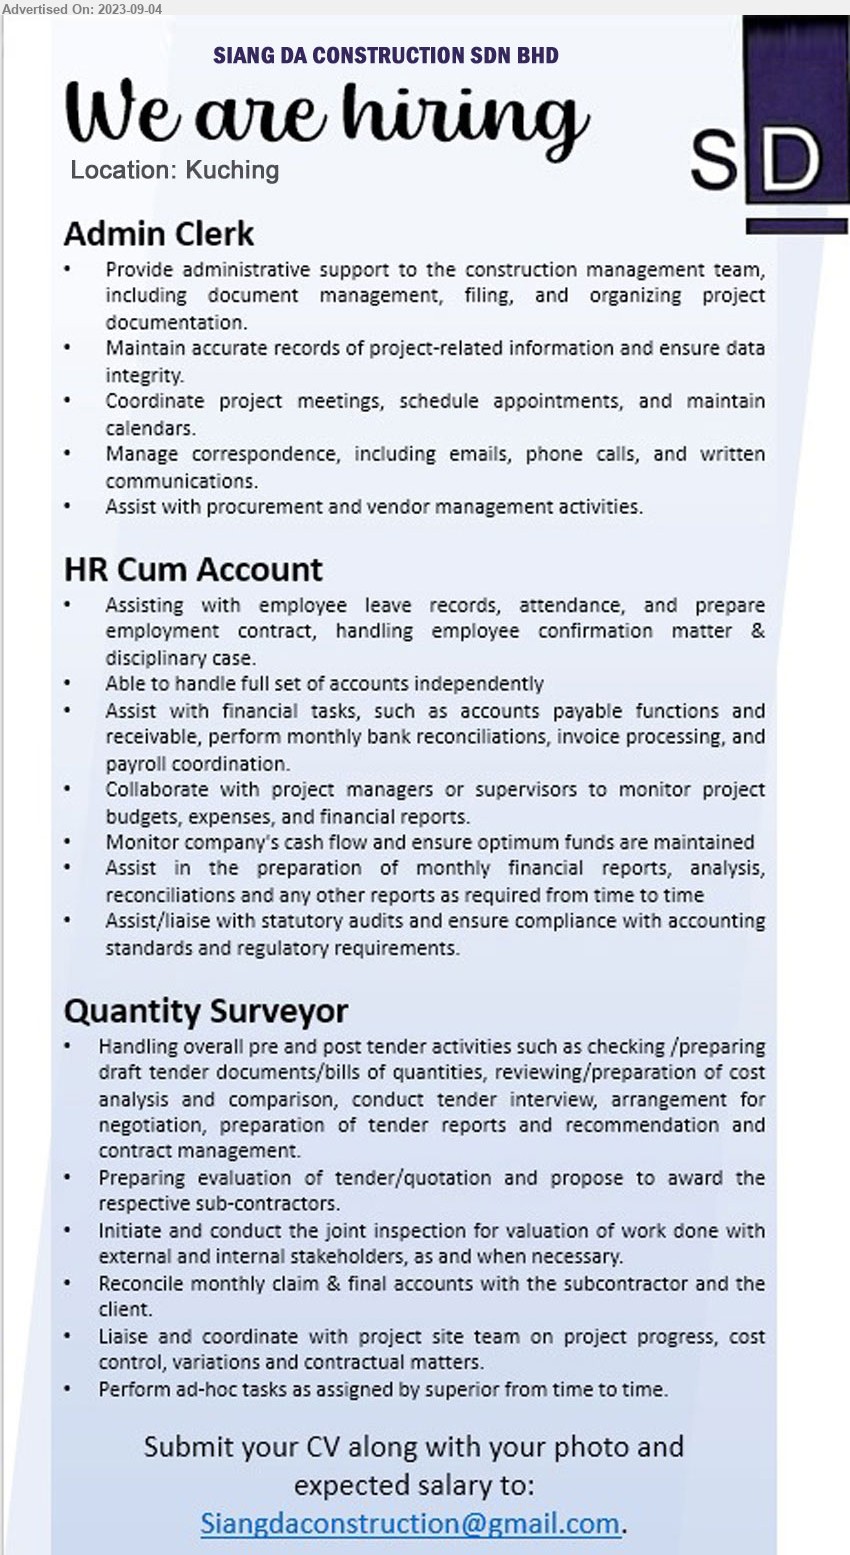 SIANG DA CONSTRUCTION SDN BHD - 1. ADMIN CLERK  (Kuching), Provide administrative support to the construction management team, including document management, filing, and organizing project documentation.,...
2. HR CUM ACCOUNT  (Kuching), Assisting with employee leave records, attendance, and prepare employment contract, handling employee confirmation matter & disciplinary case,...
3. QUANTITY SURVEYOR  (Kuching), Handling overall pre and post tender activities such as checking /preparing draft tender documents/bills of quantities,...
Email resume to ...
